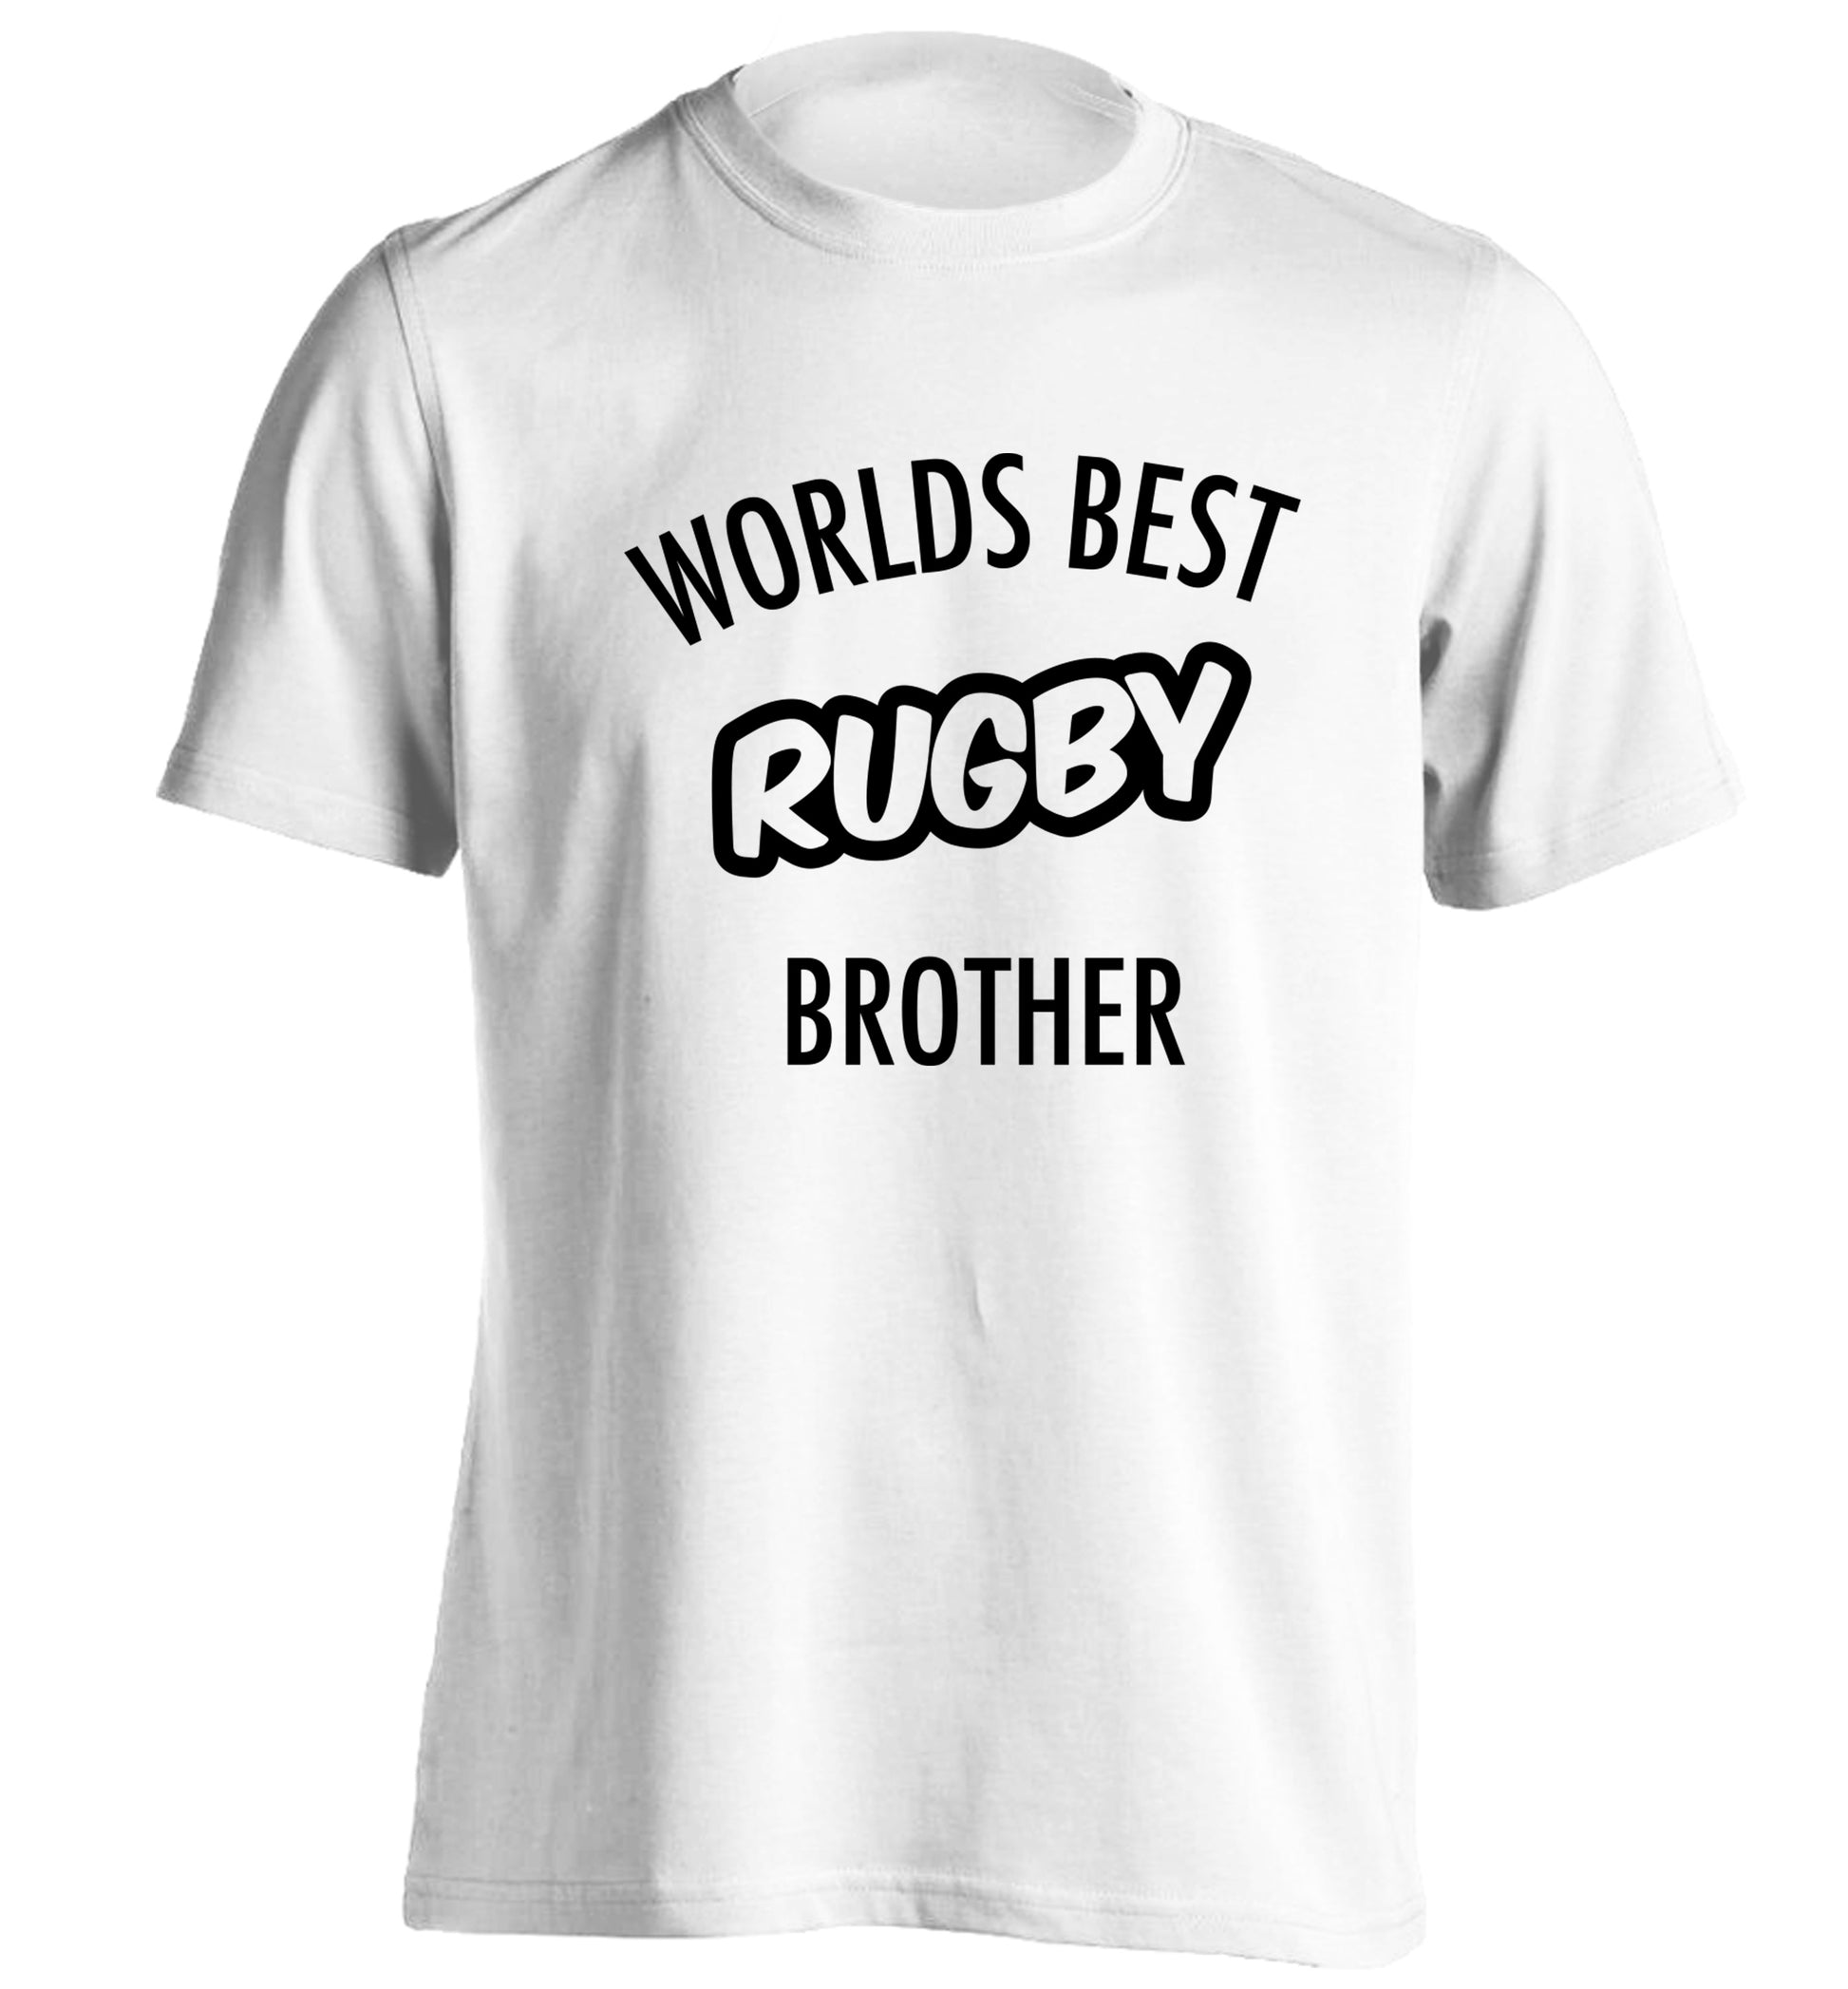 Worlds best rugby brother adults unisex white Tshirt 2XL